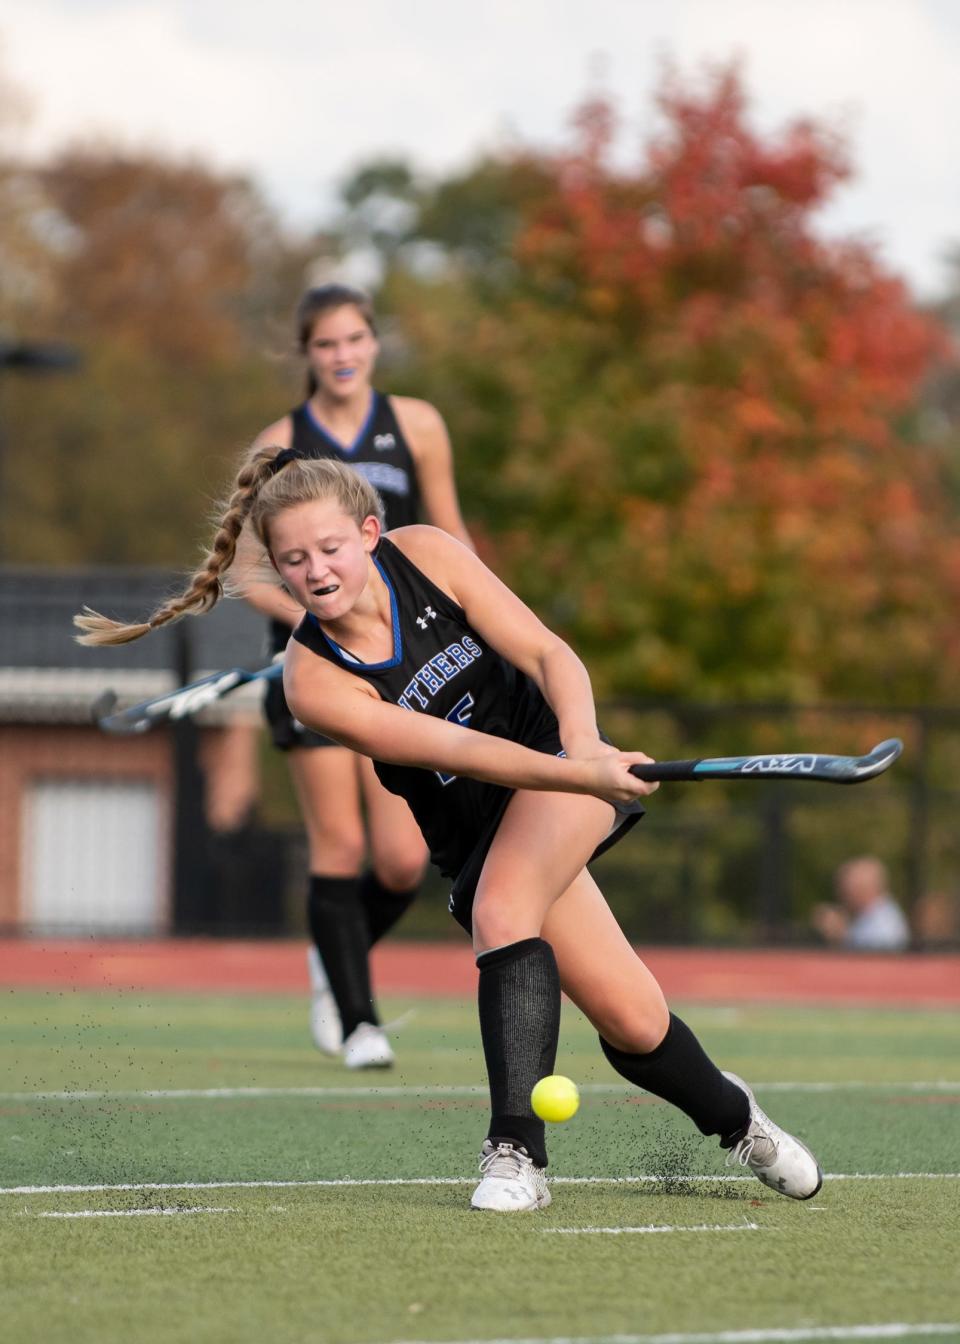 Quakertown's Megan Roth passes in a first-round District One Class 3A playoff game against Central Bucks East, on Monday, October 25, 2021. The Patriots shut out the Panthers, 3-0.